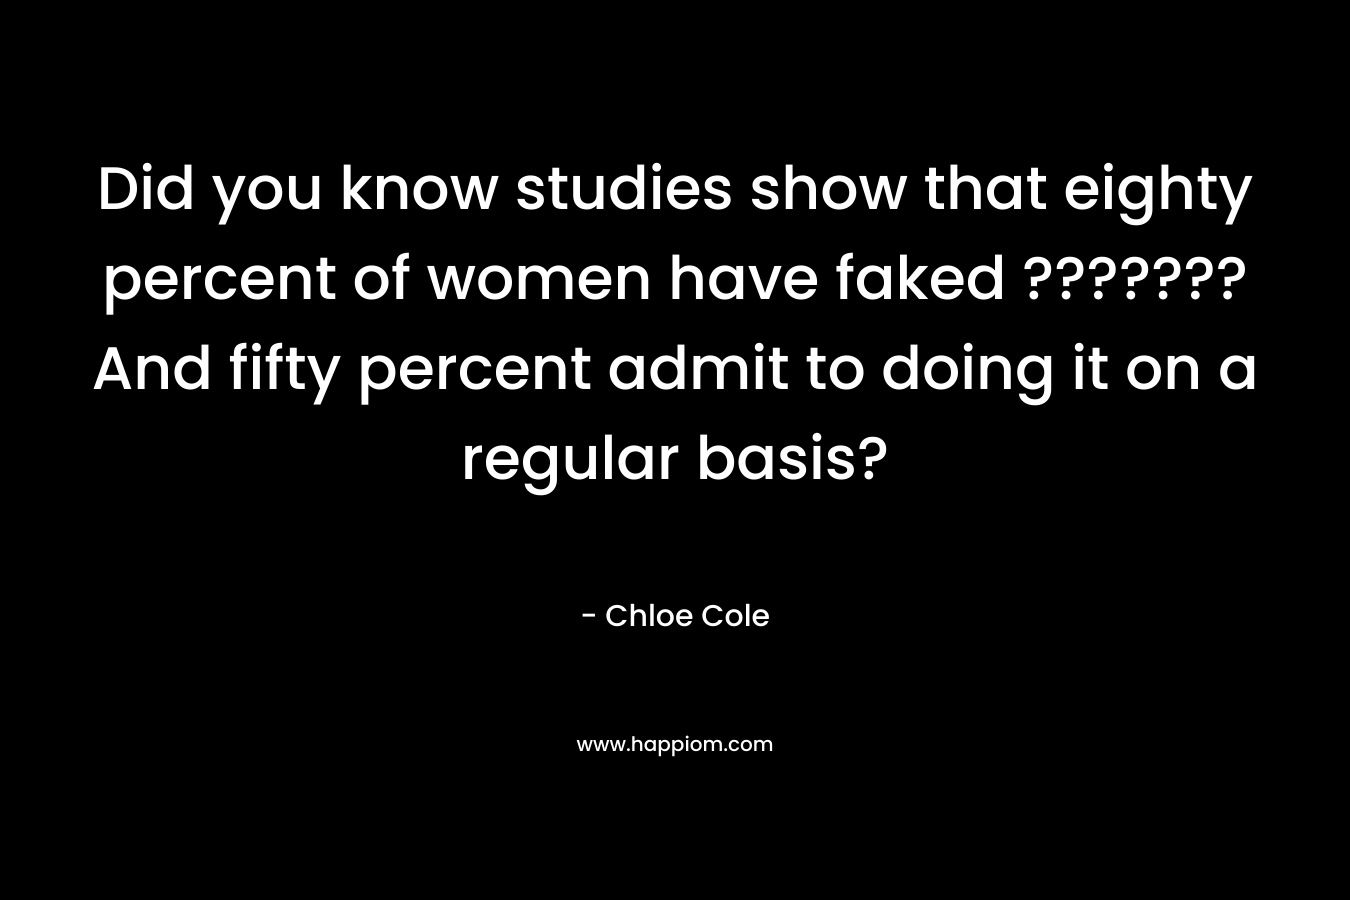 Did you know studies show that eighty percent of women have faked ??????? And fifty percent admit to doing it on a regular basis?